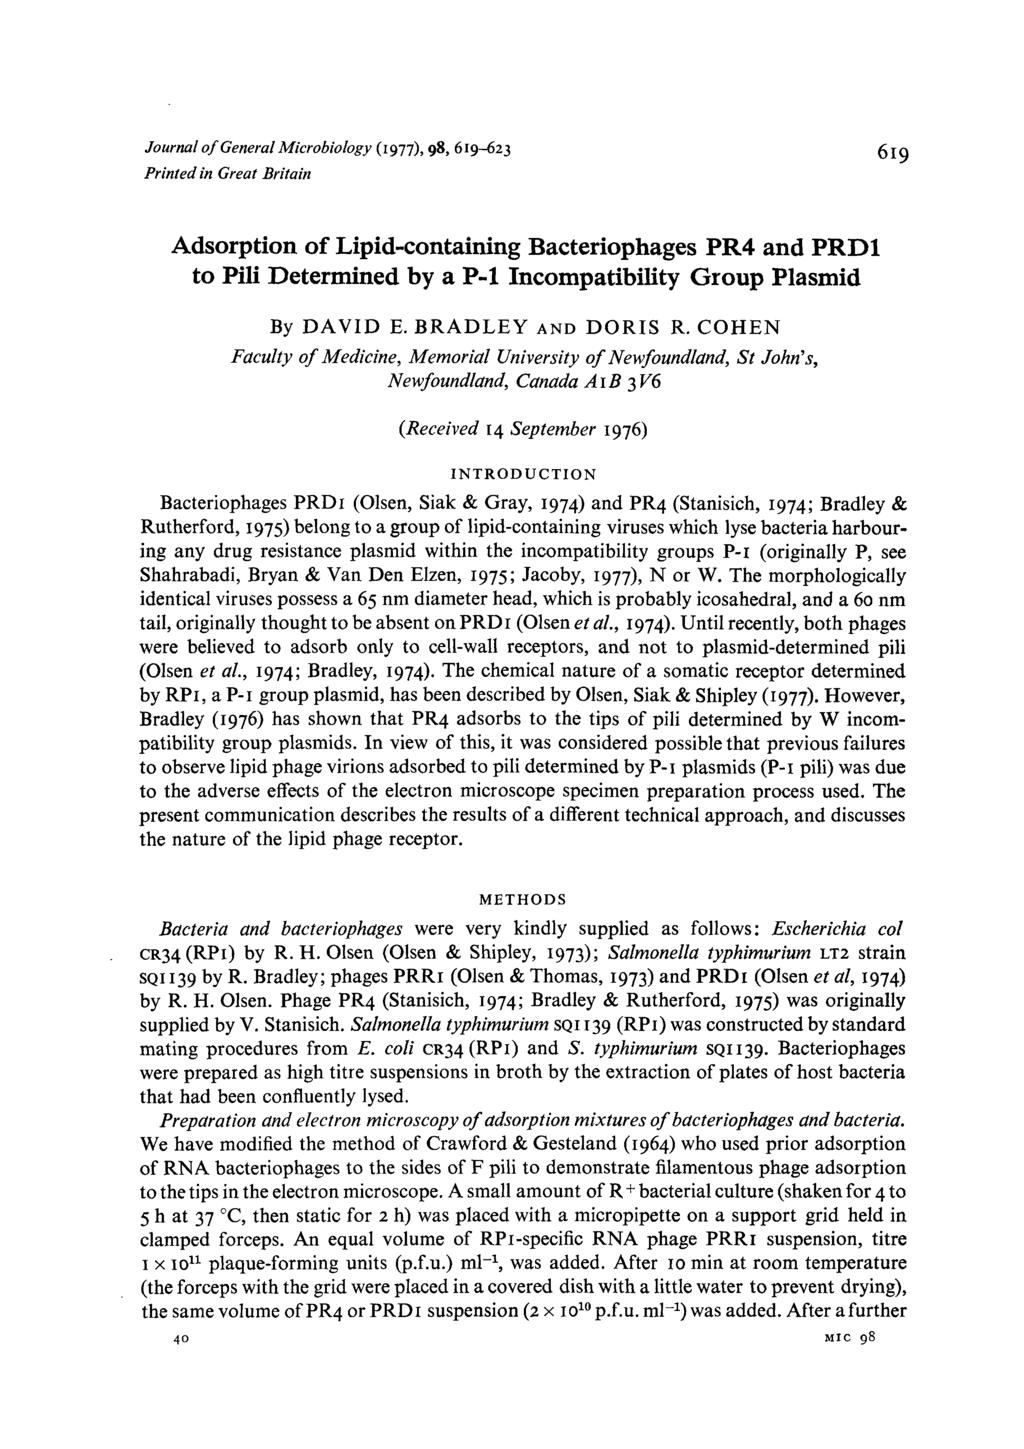 Journal of General Microbiology (I 977), 98,6 19423 Printed in Great Britain 619 Adsorption of Lipid-containing Bacteriophages PR4 and PRDl to Pili Determined by a P-1 Incompatibility Group Plasmid